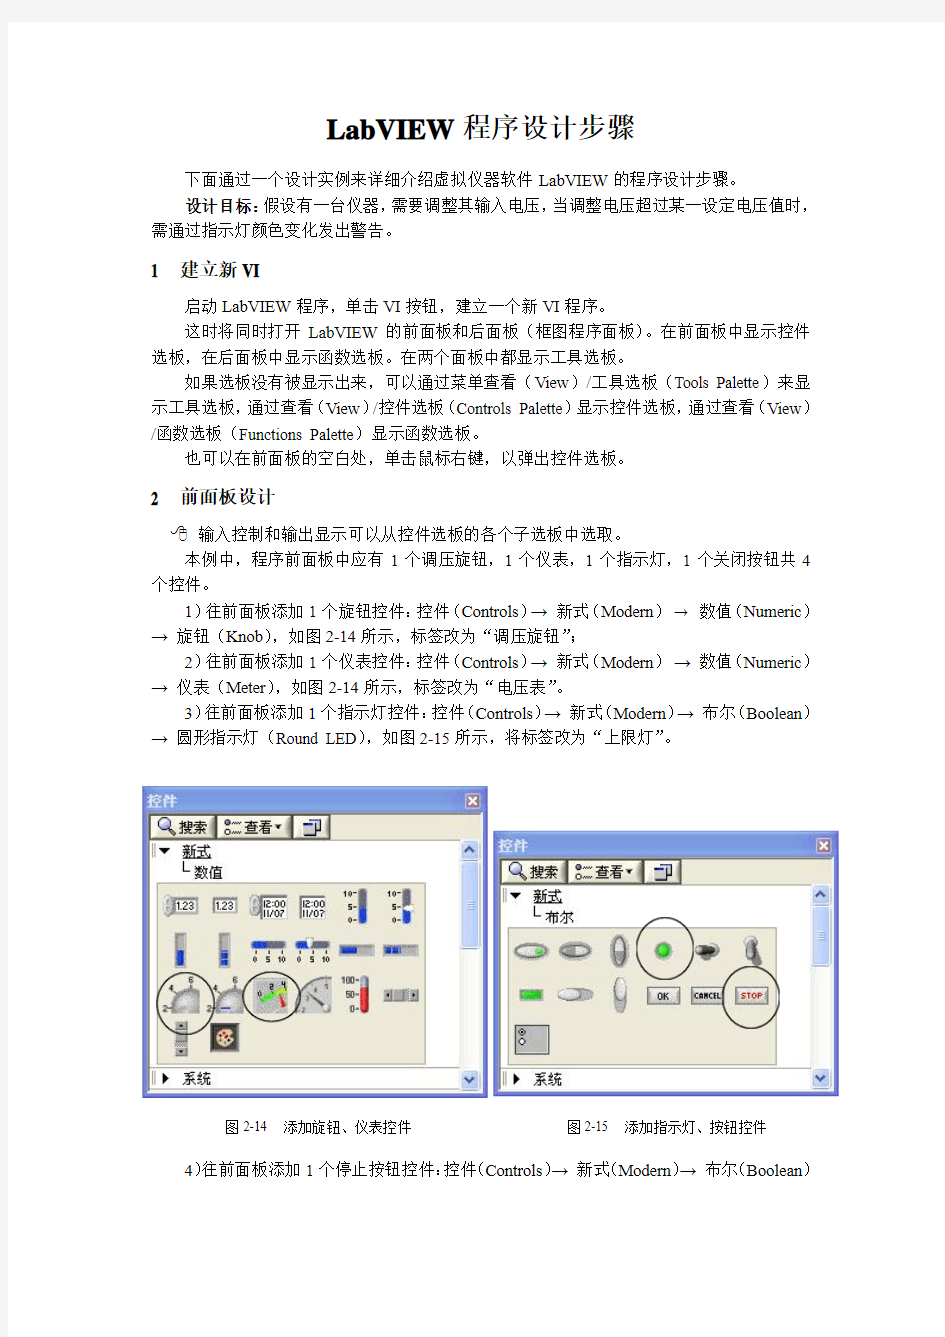 LabVIEW程序设计步骤